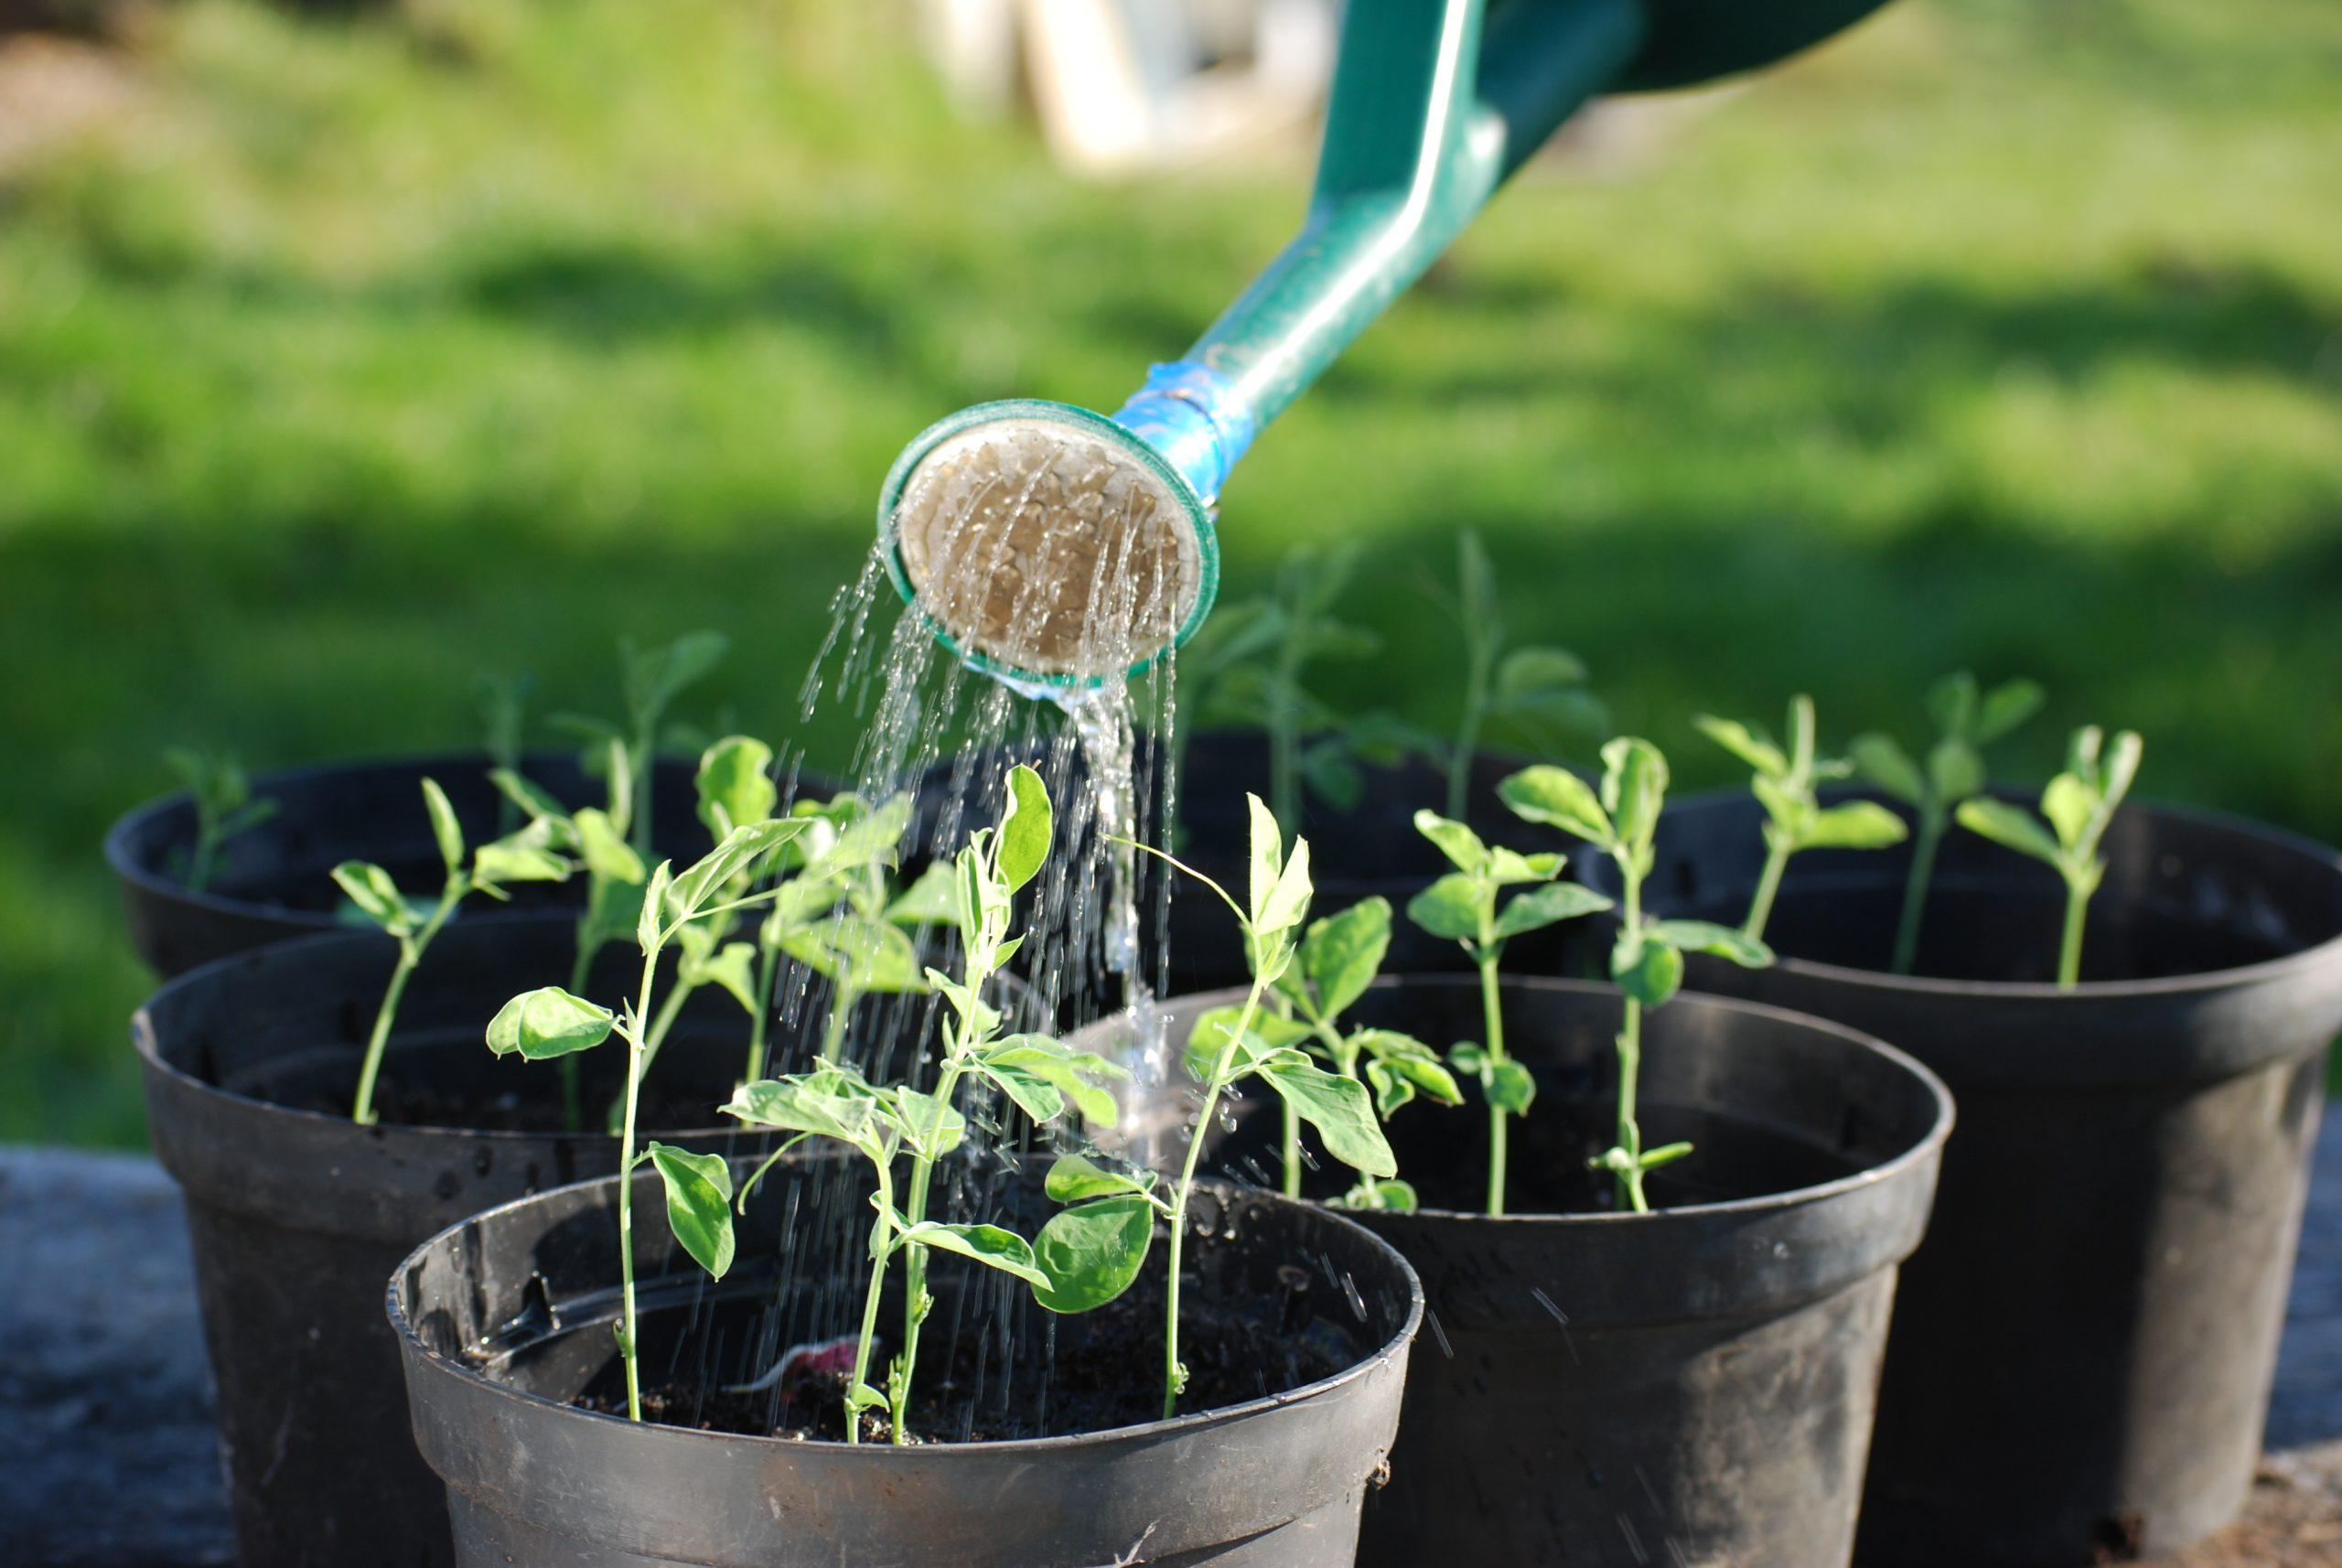 Watering young plants